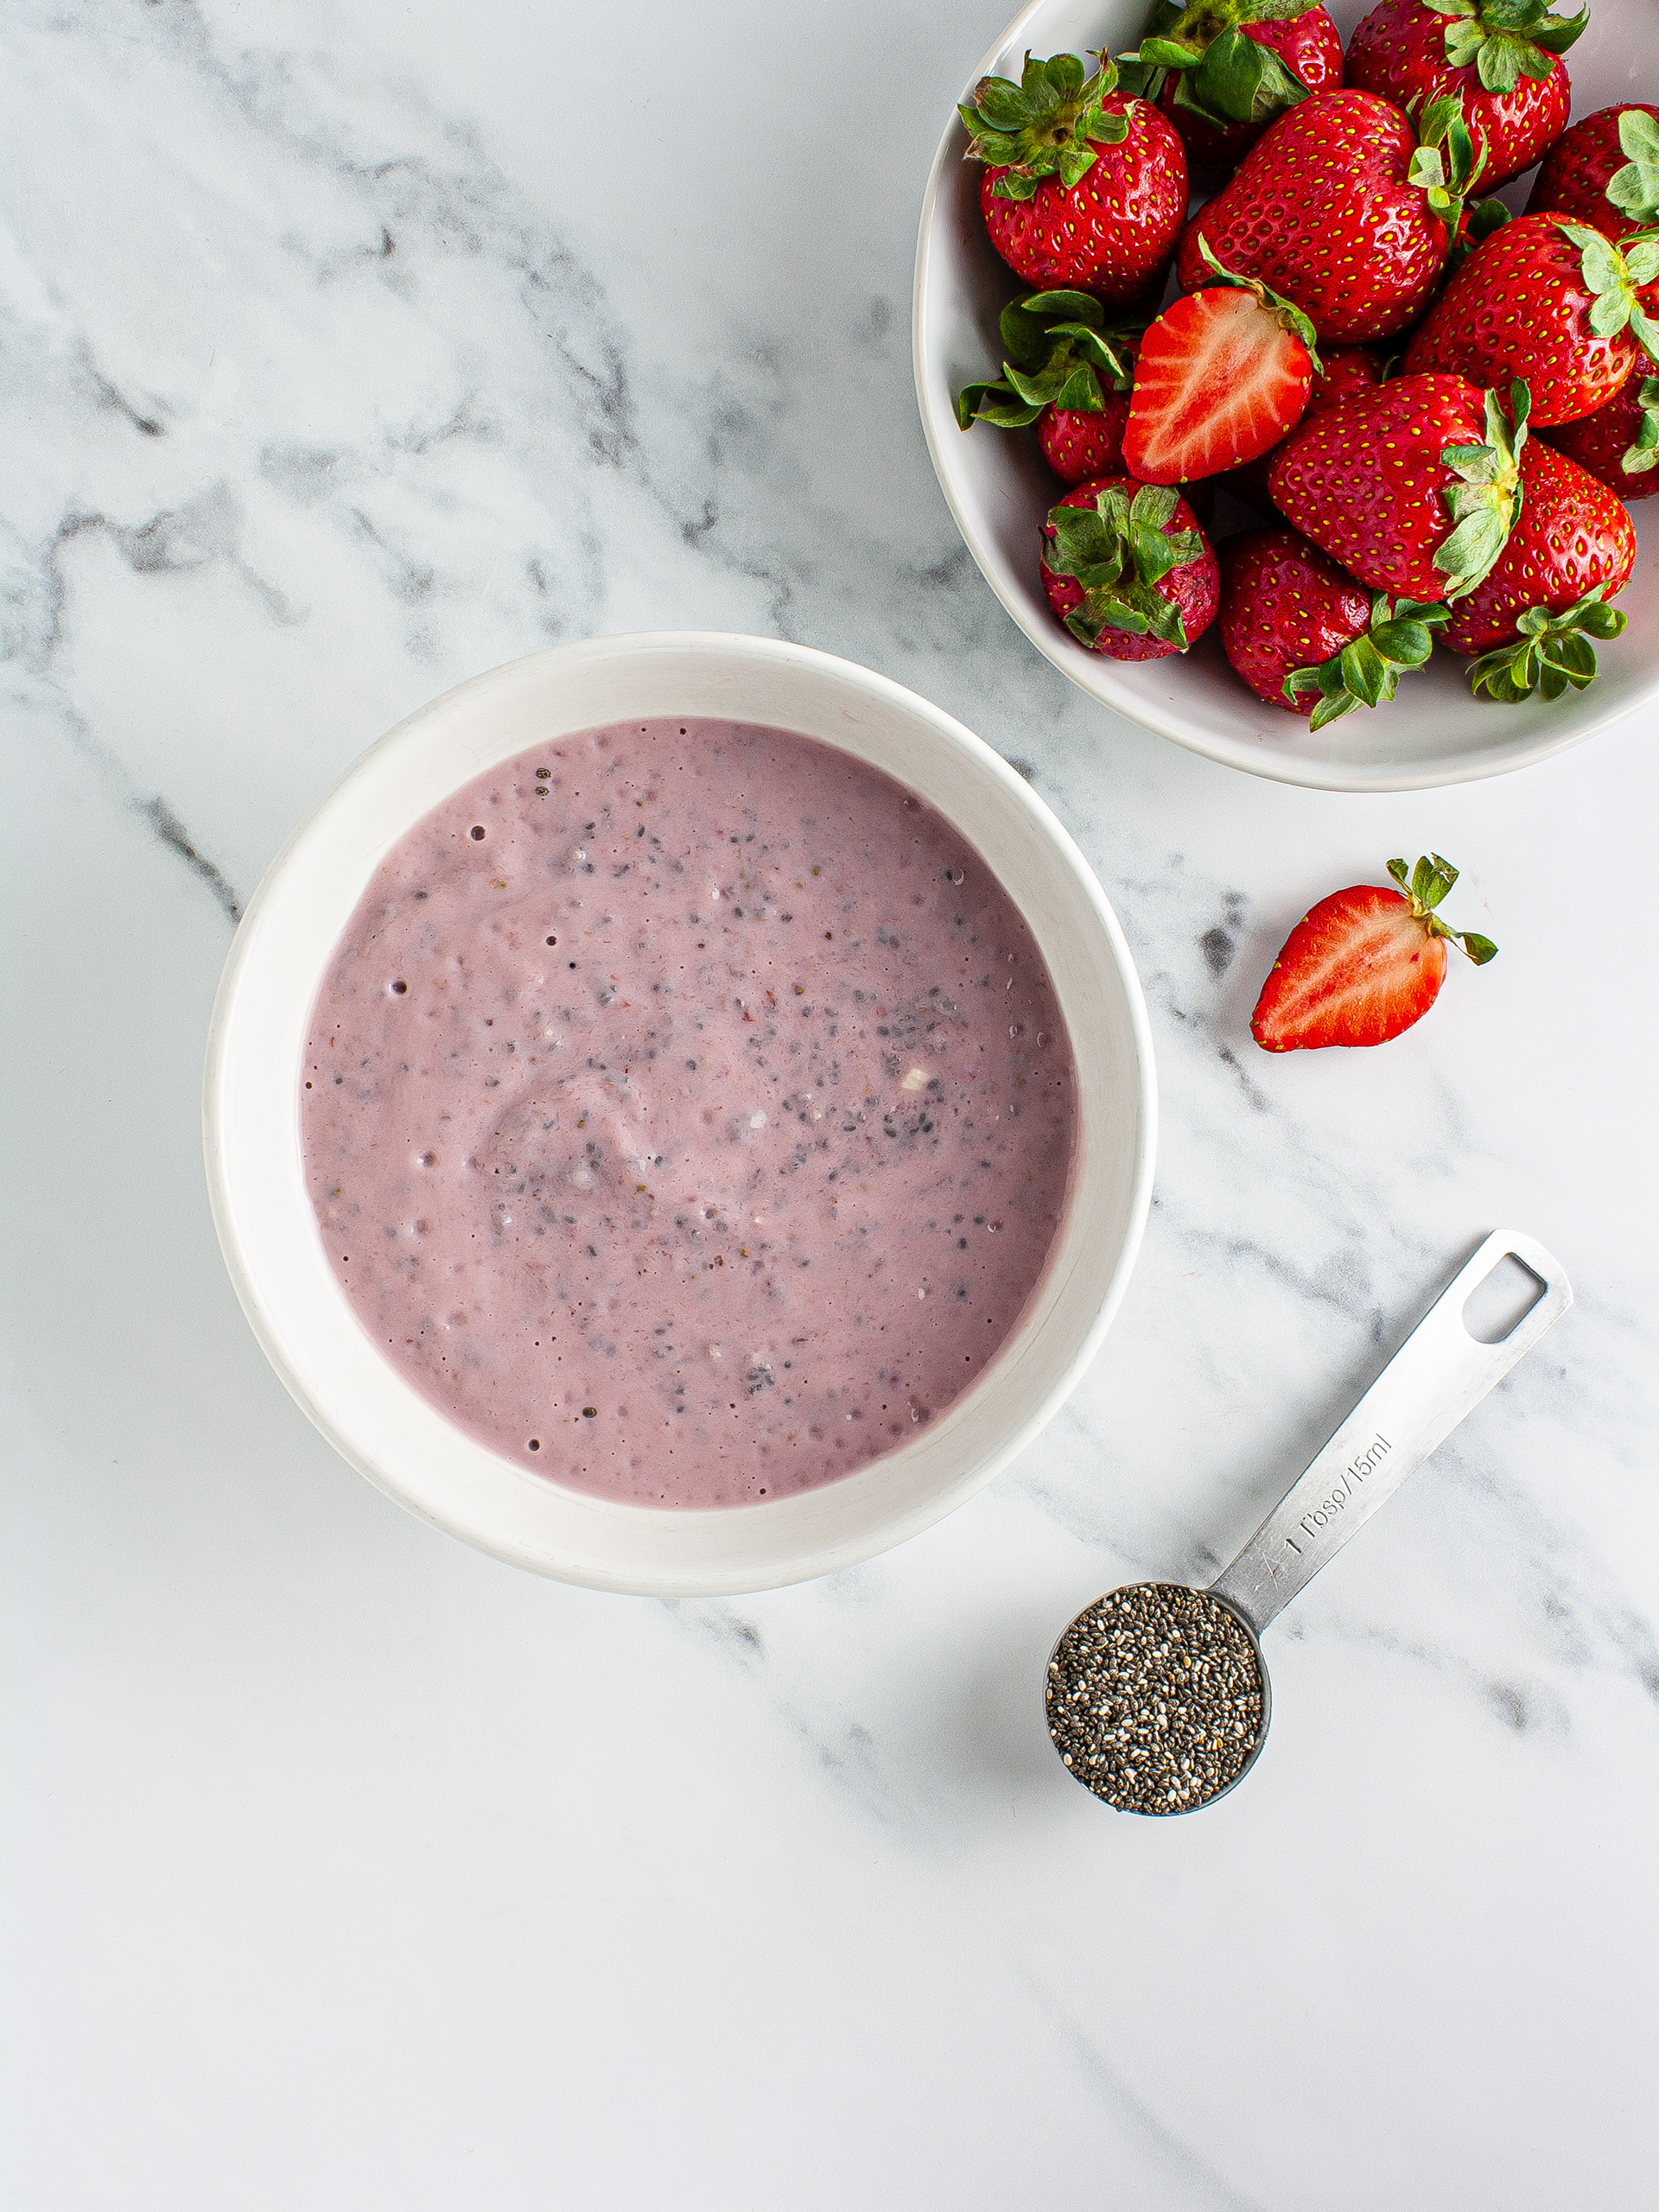 Blended strawberries with chia seeds, banana, and silken tofu 